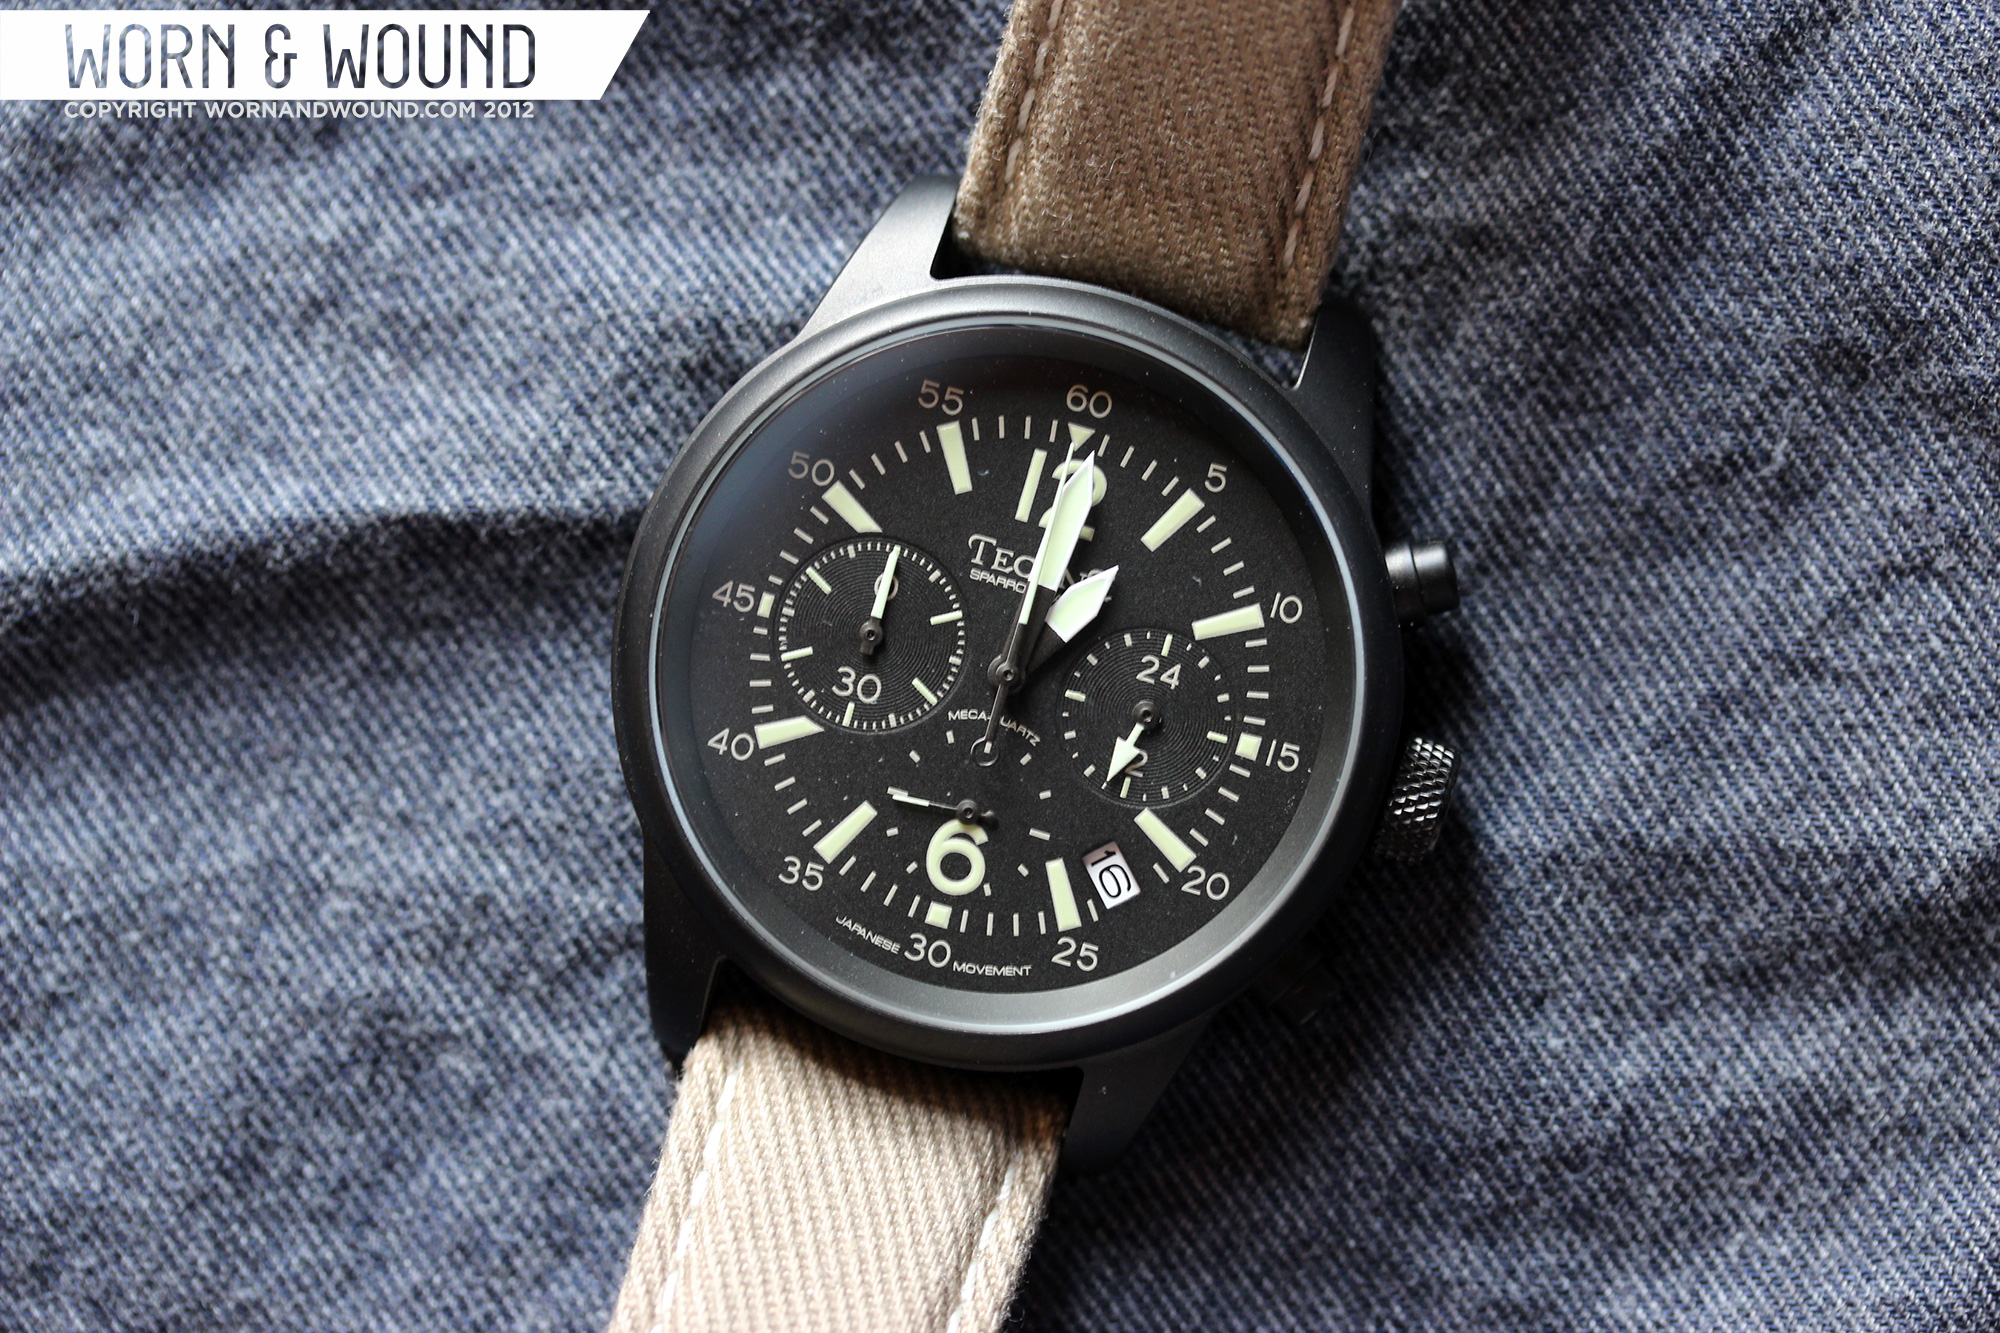 Review: Techné Sparrowhawk II - Worn & Wound